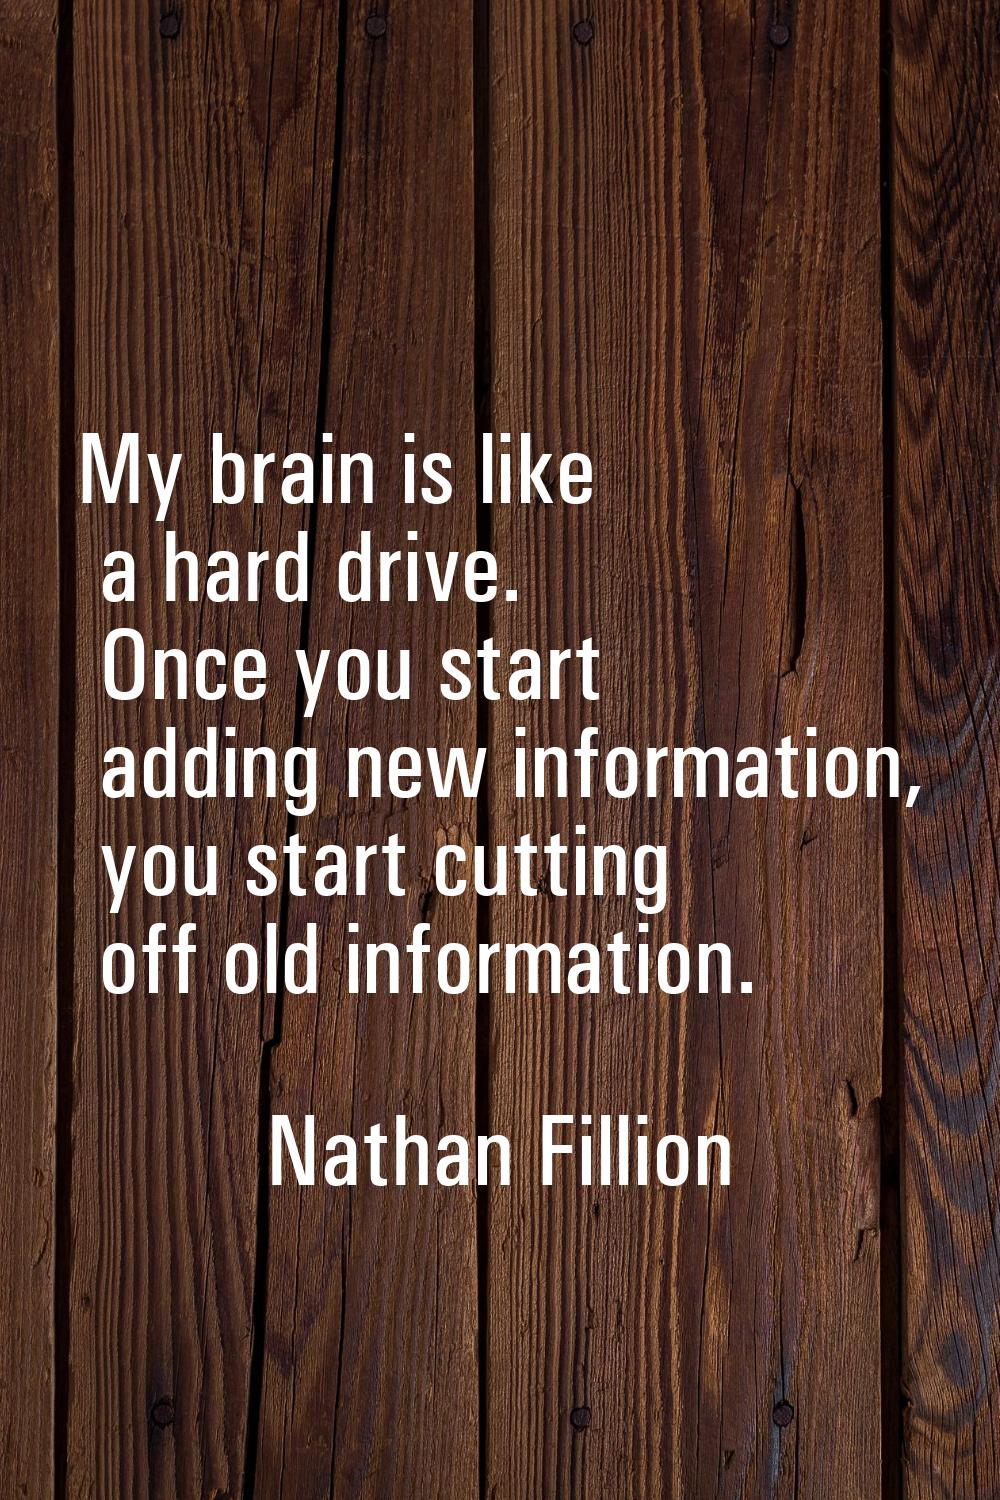 My brain is like a hard drive. Once you start adding new information, you start cutting off old inf